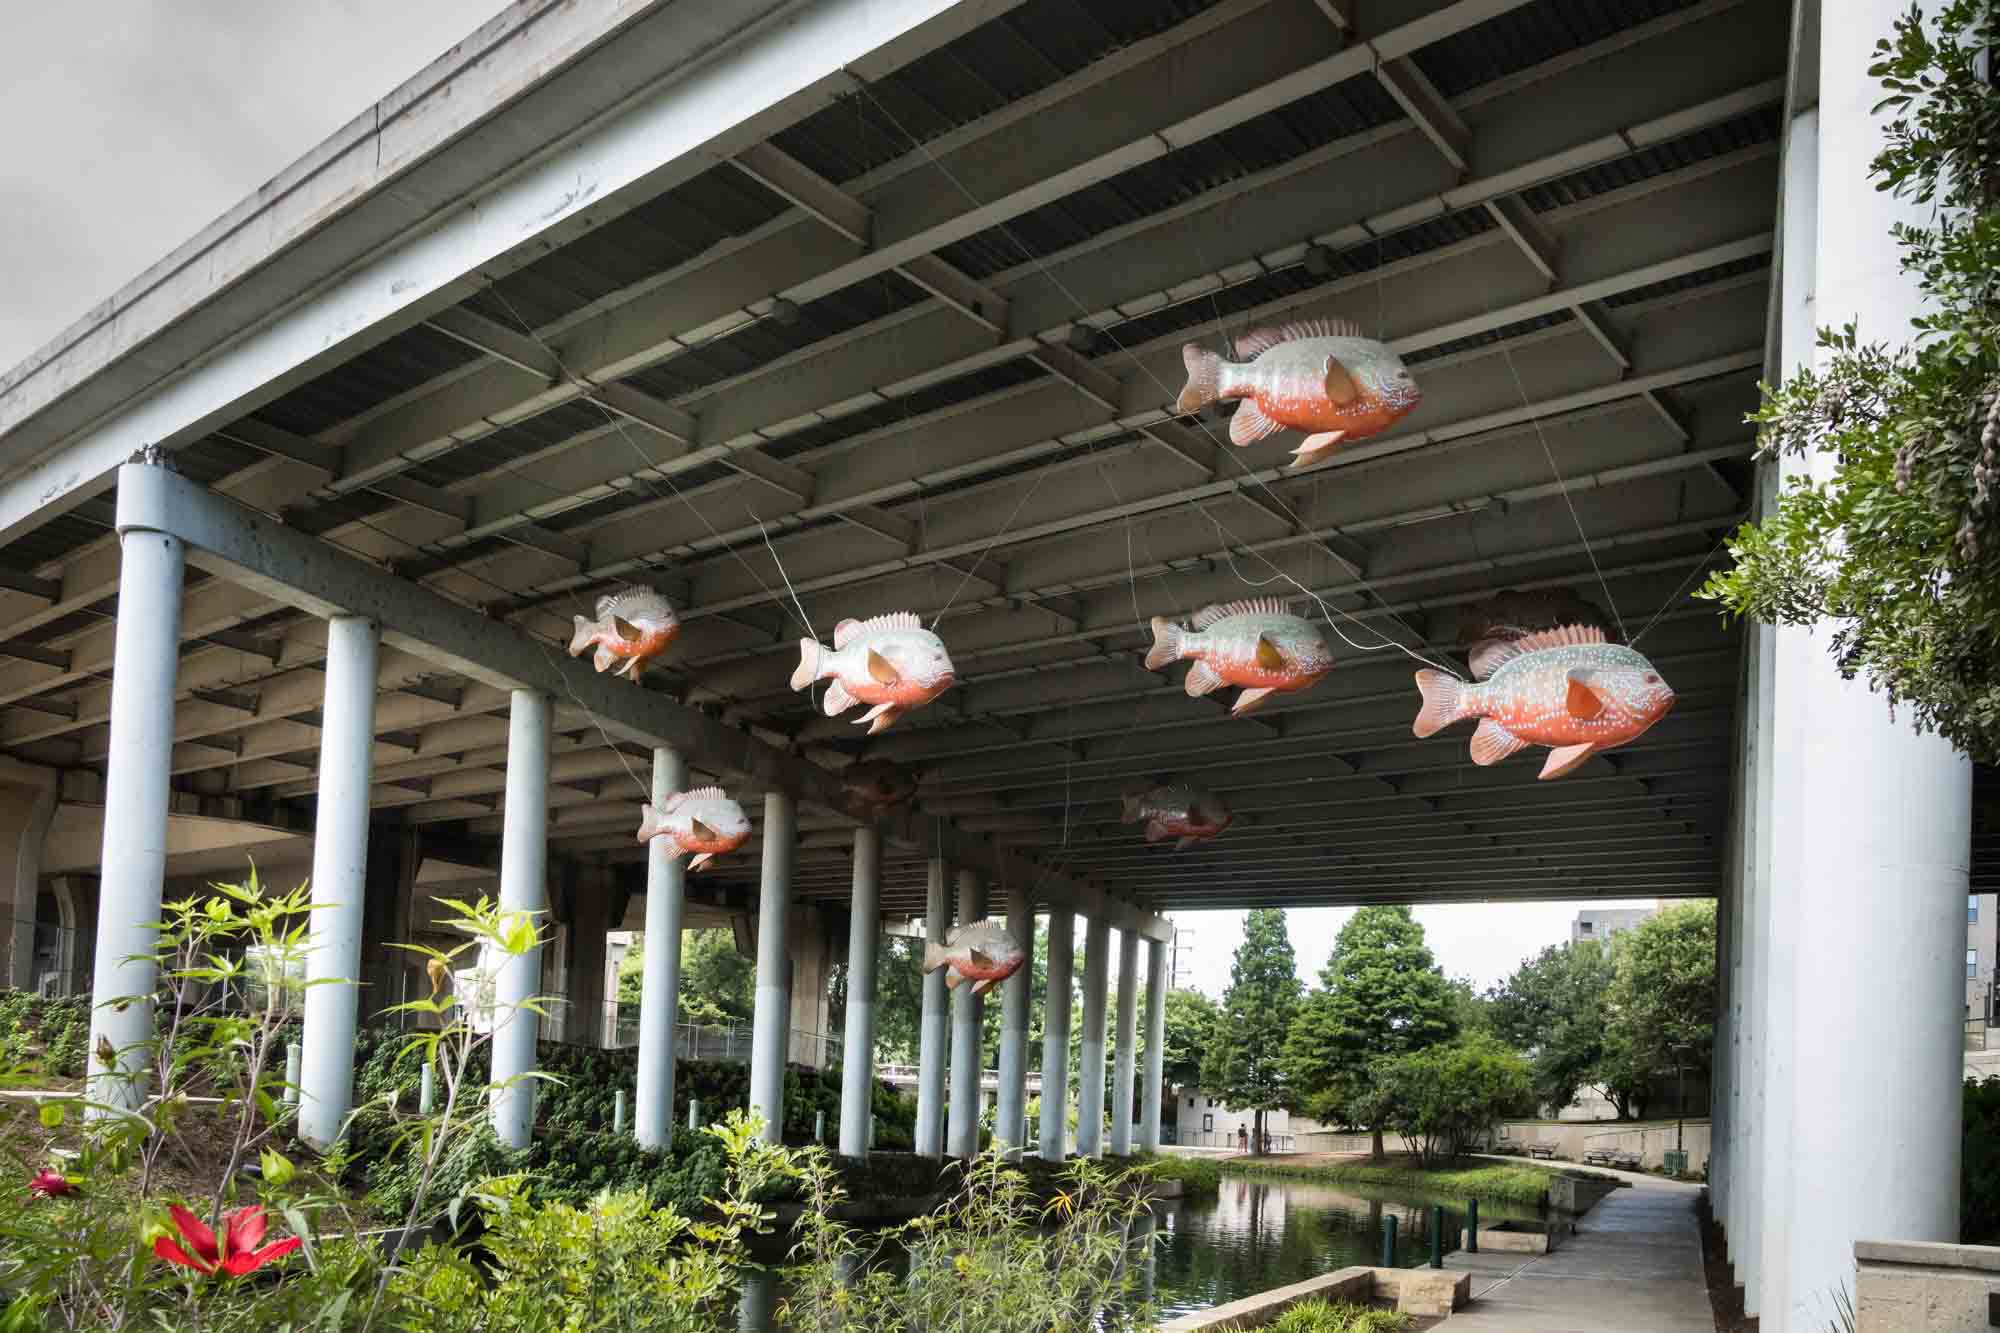 Large fake fish hanging from a highway overpass along the Riverwalk in San Antonio